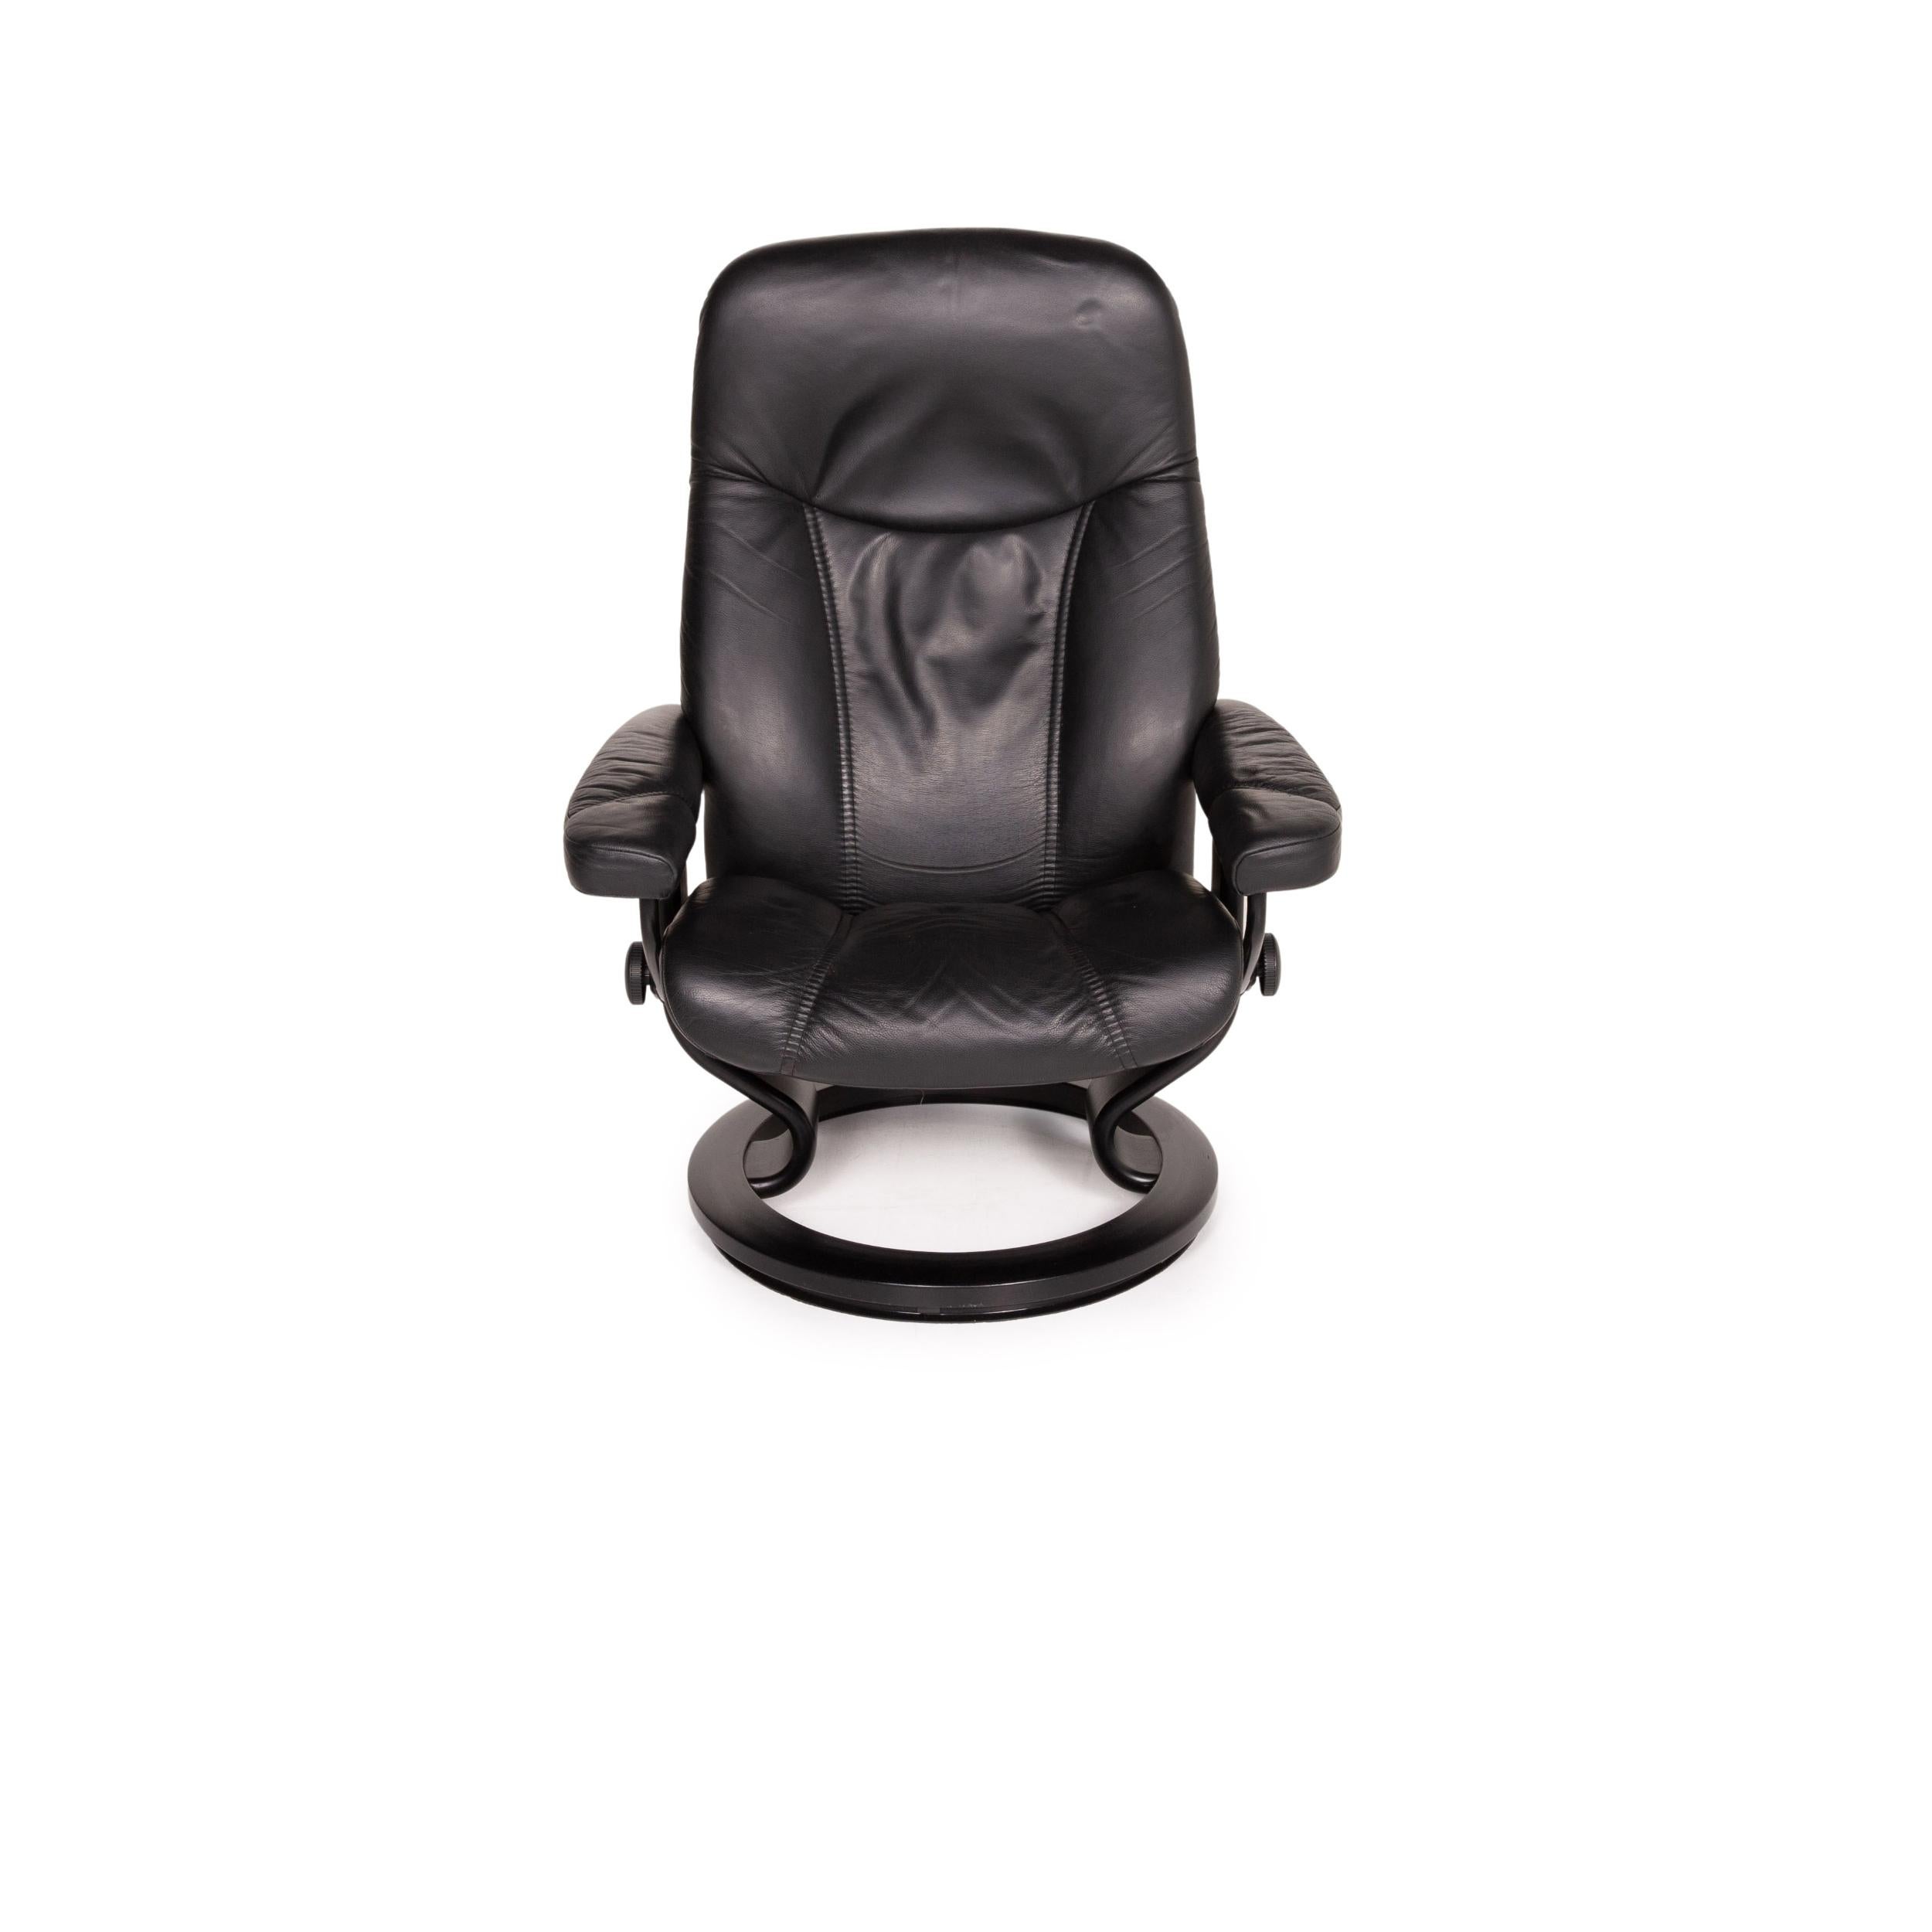 Stressless Consul Leather Armchair Incl. Stool Black Function Relaxation For Sale 5